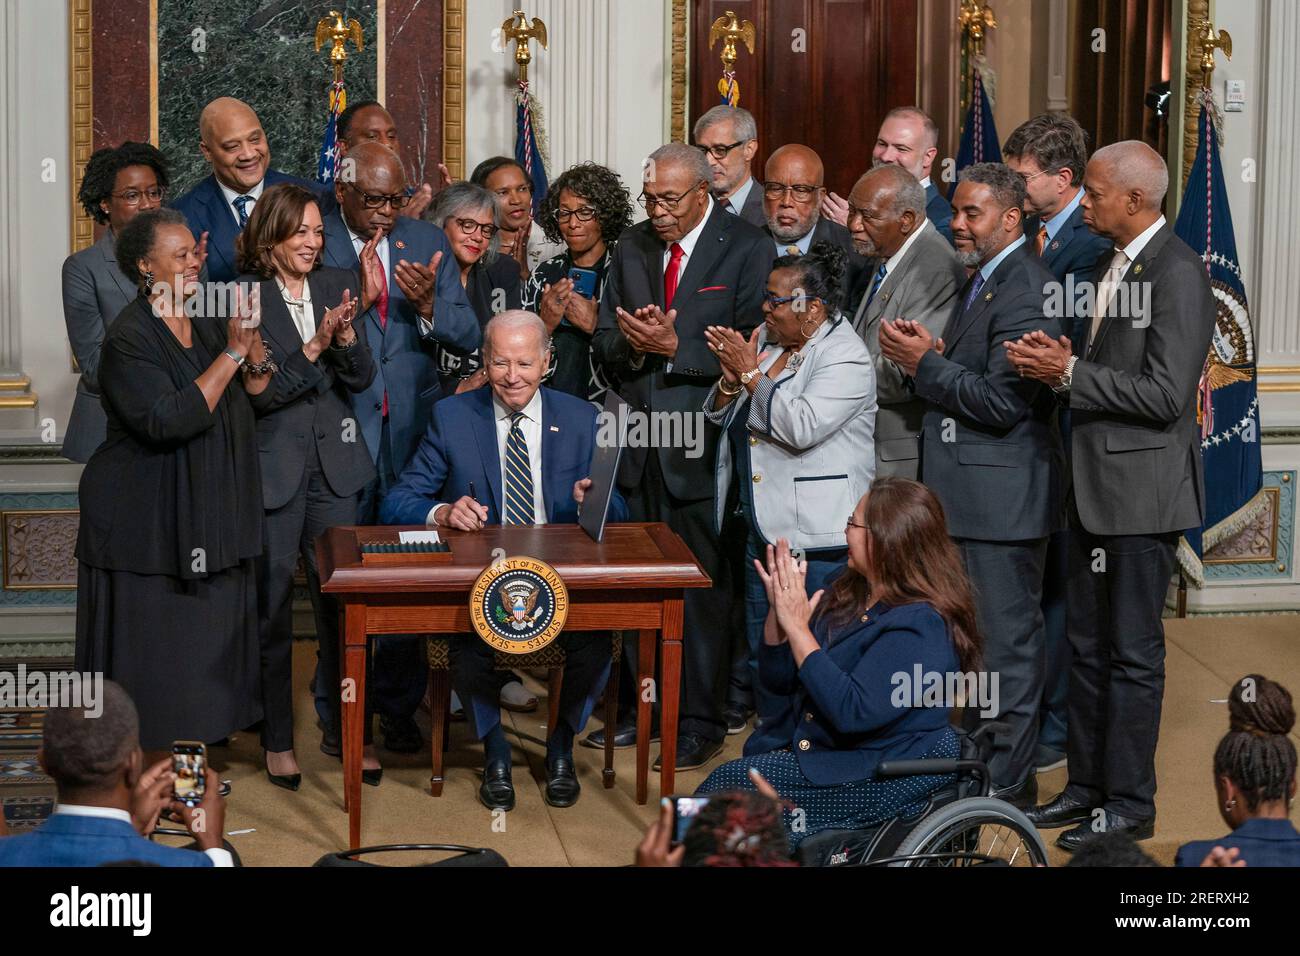 Washington, United States of America. 25 July, 2023. U.S President Joe Biden signs a proclamation to establish the Emmett Till and Mamie Till-Mobley National Monument during an event in the Indian Treaty Room of the White House, July 25, 2023 in Washington, D.C. Emmett Till, was a 14 year old black child lynched by a white mob in Mississippi in 1955. Credit: Lawrence Jackson/White House Photo/Alamy Live News Stock Photo